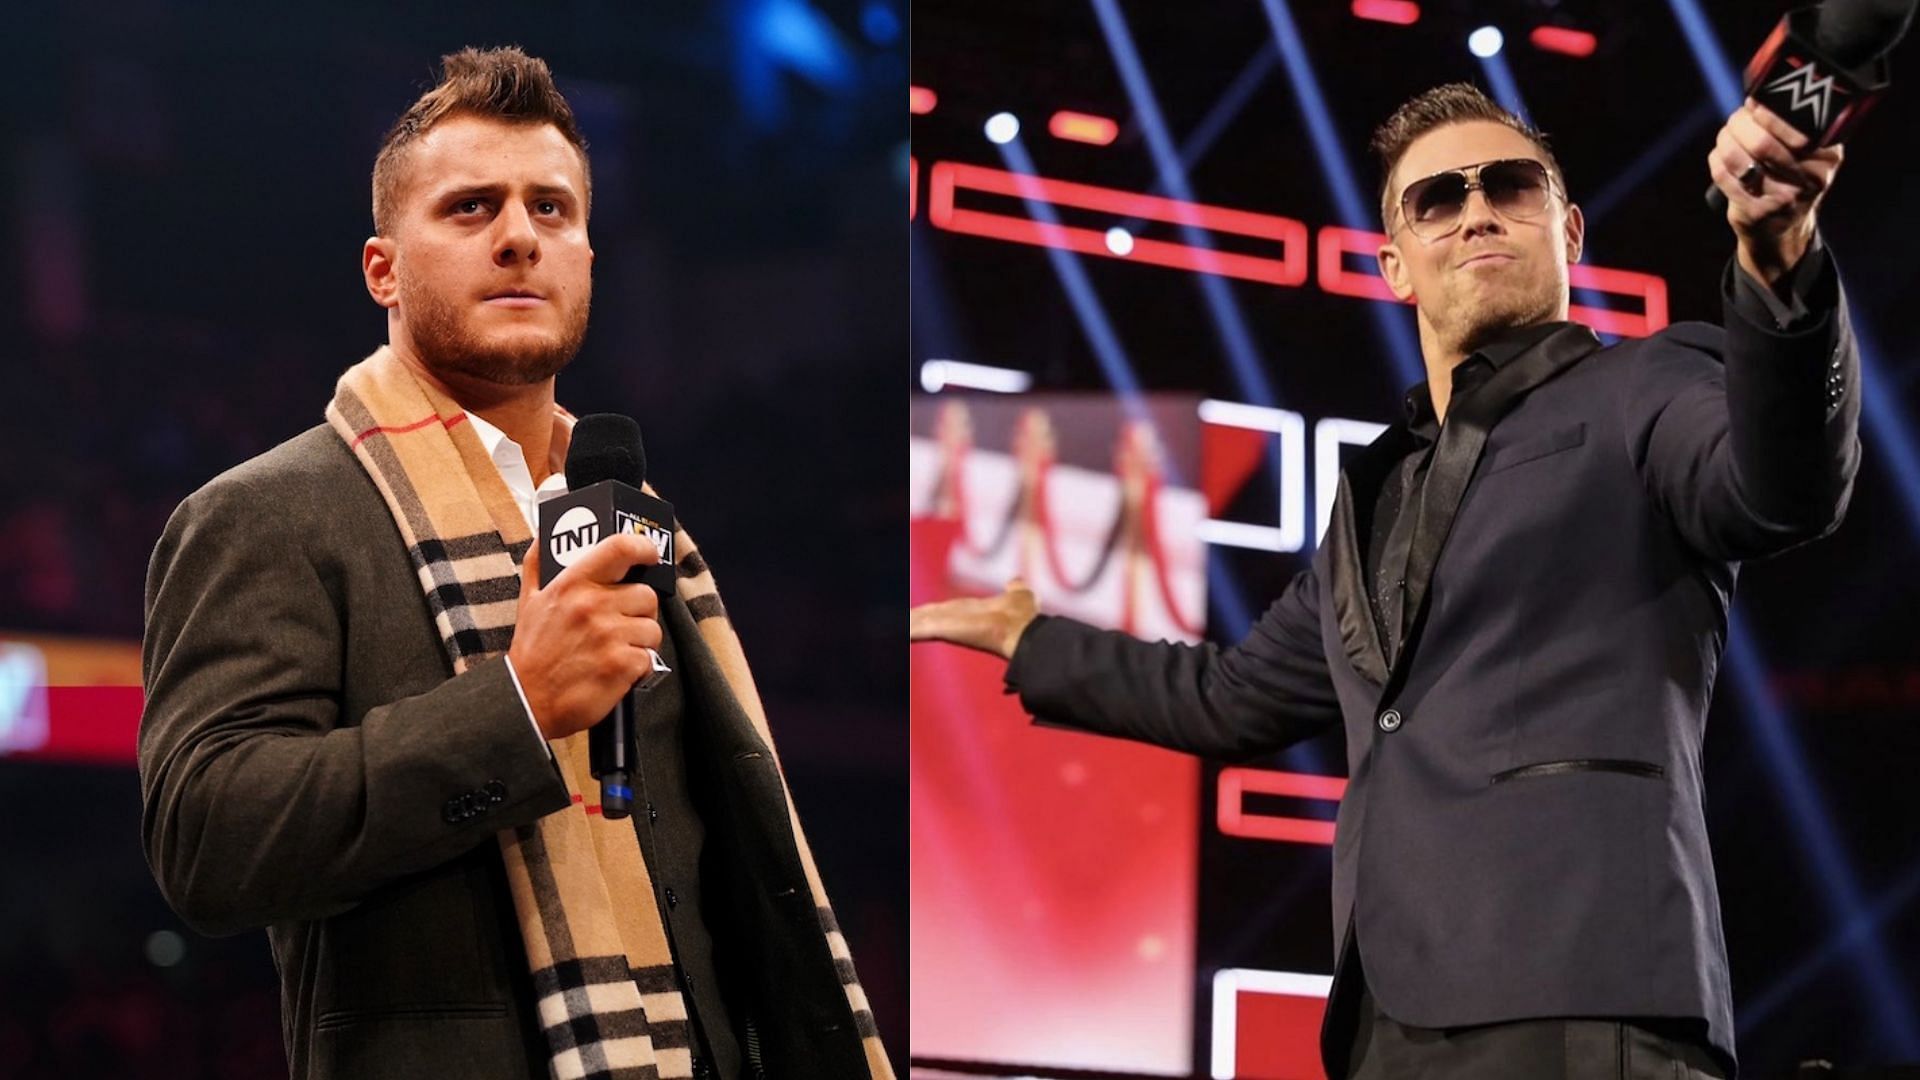 AEW wrestler MJF(left) has been compared to WWE Superstar The Miz (right).